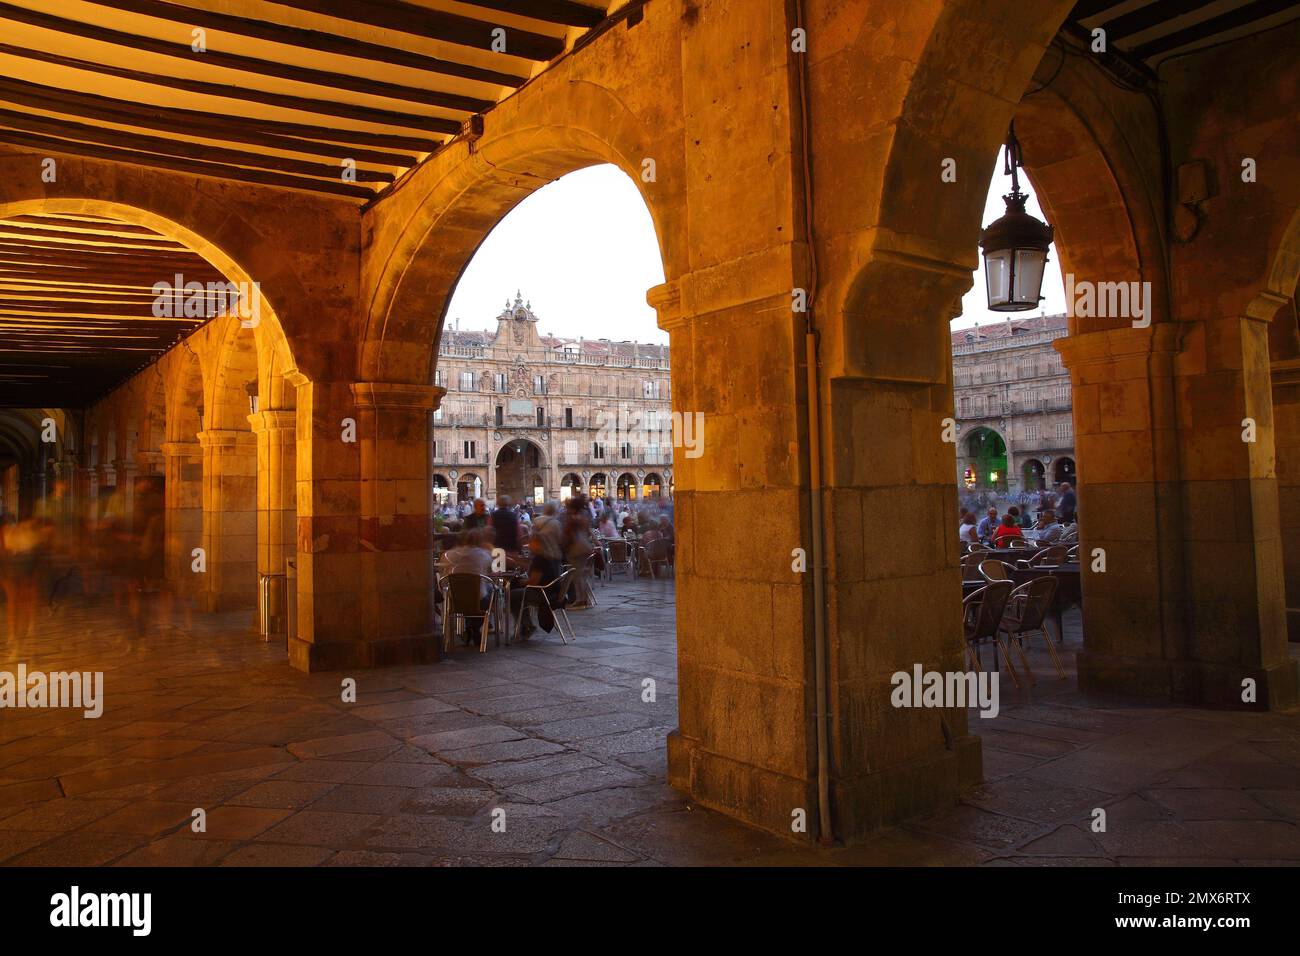 Arcade of the Mayor square. Salamanca. The Arcade of the Mayor Square in Salamanca is an impressive covered walkway located in the old quarter of Stock Photo